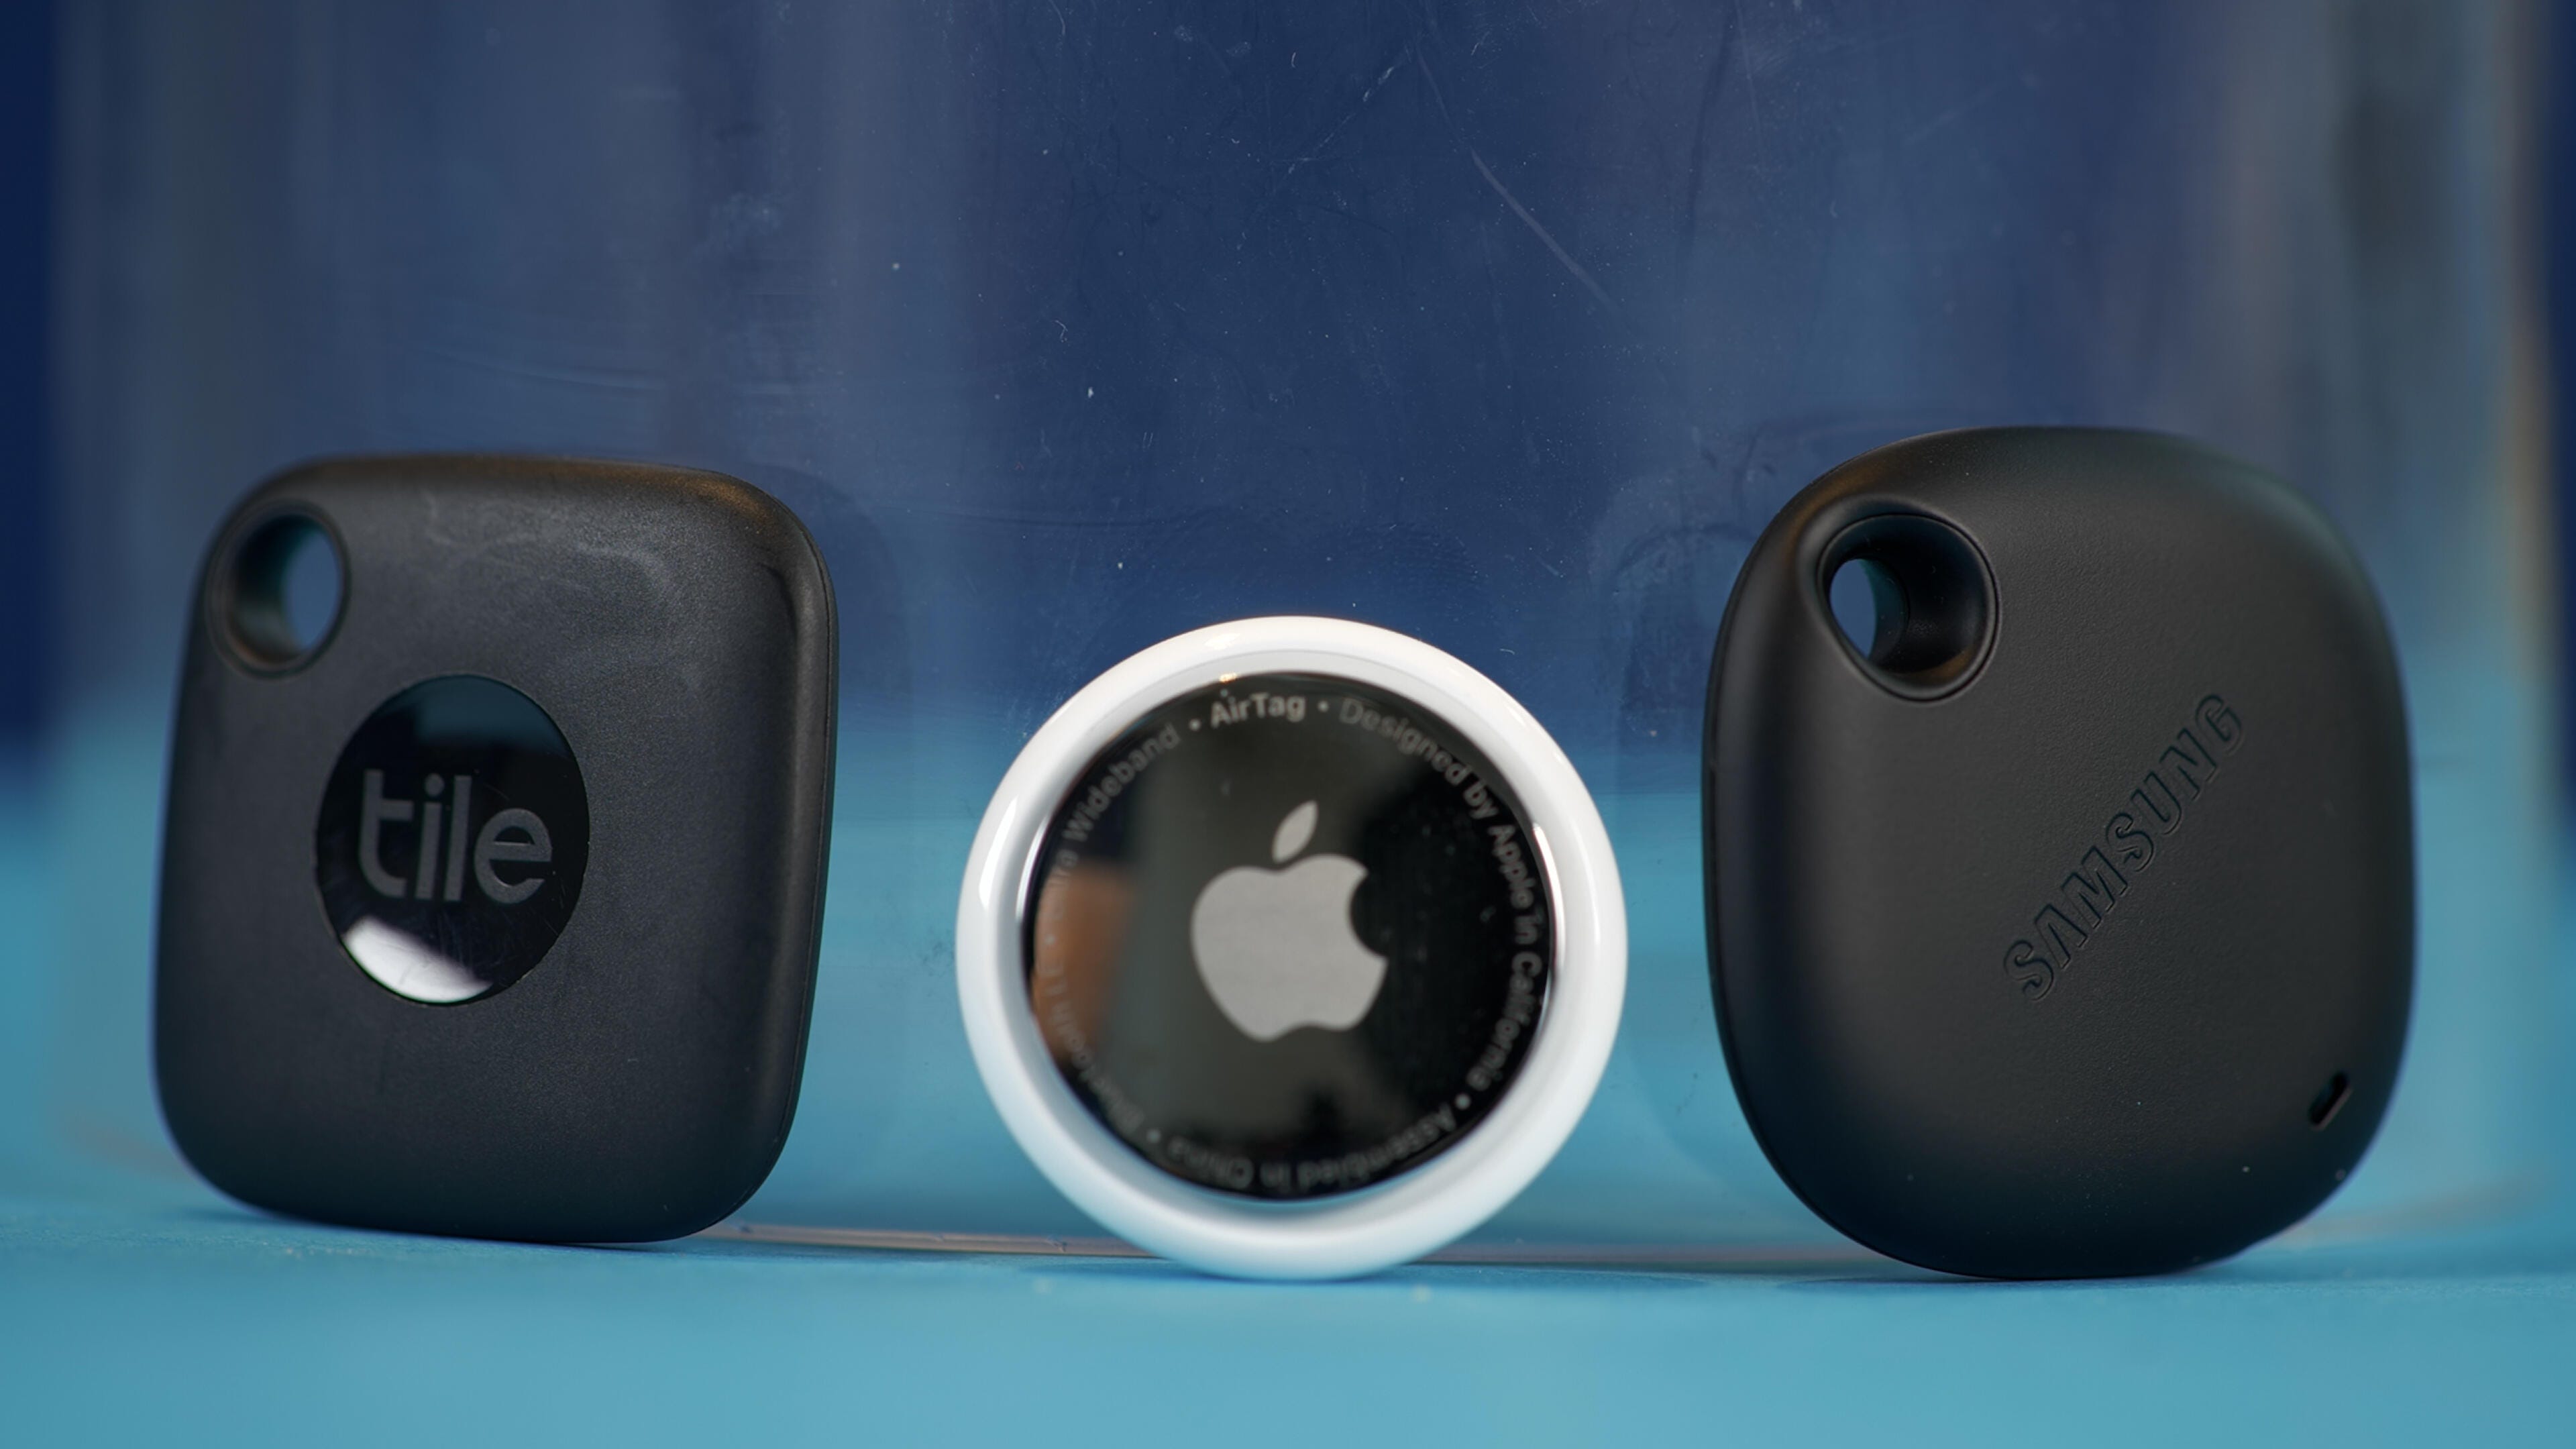 Samsung SmartTag+ & Apple AirTag: An Ultra-Wide-Band Device Comparison